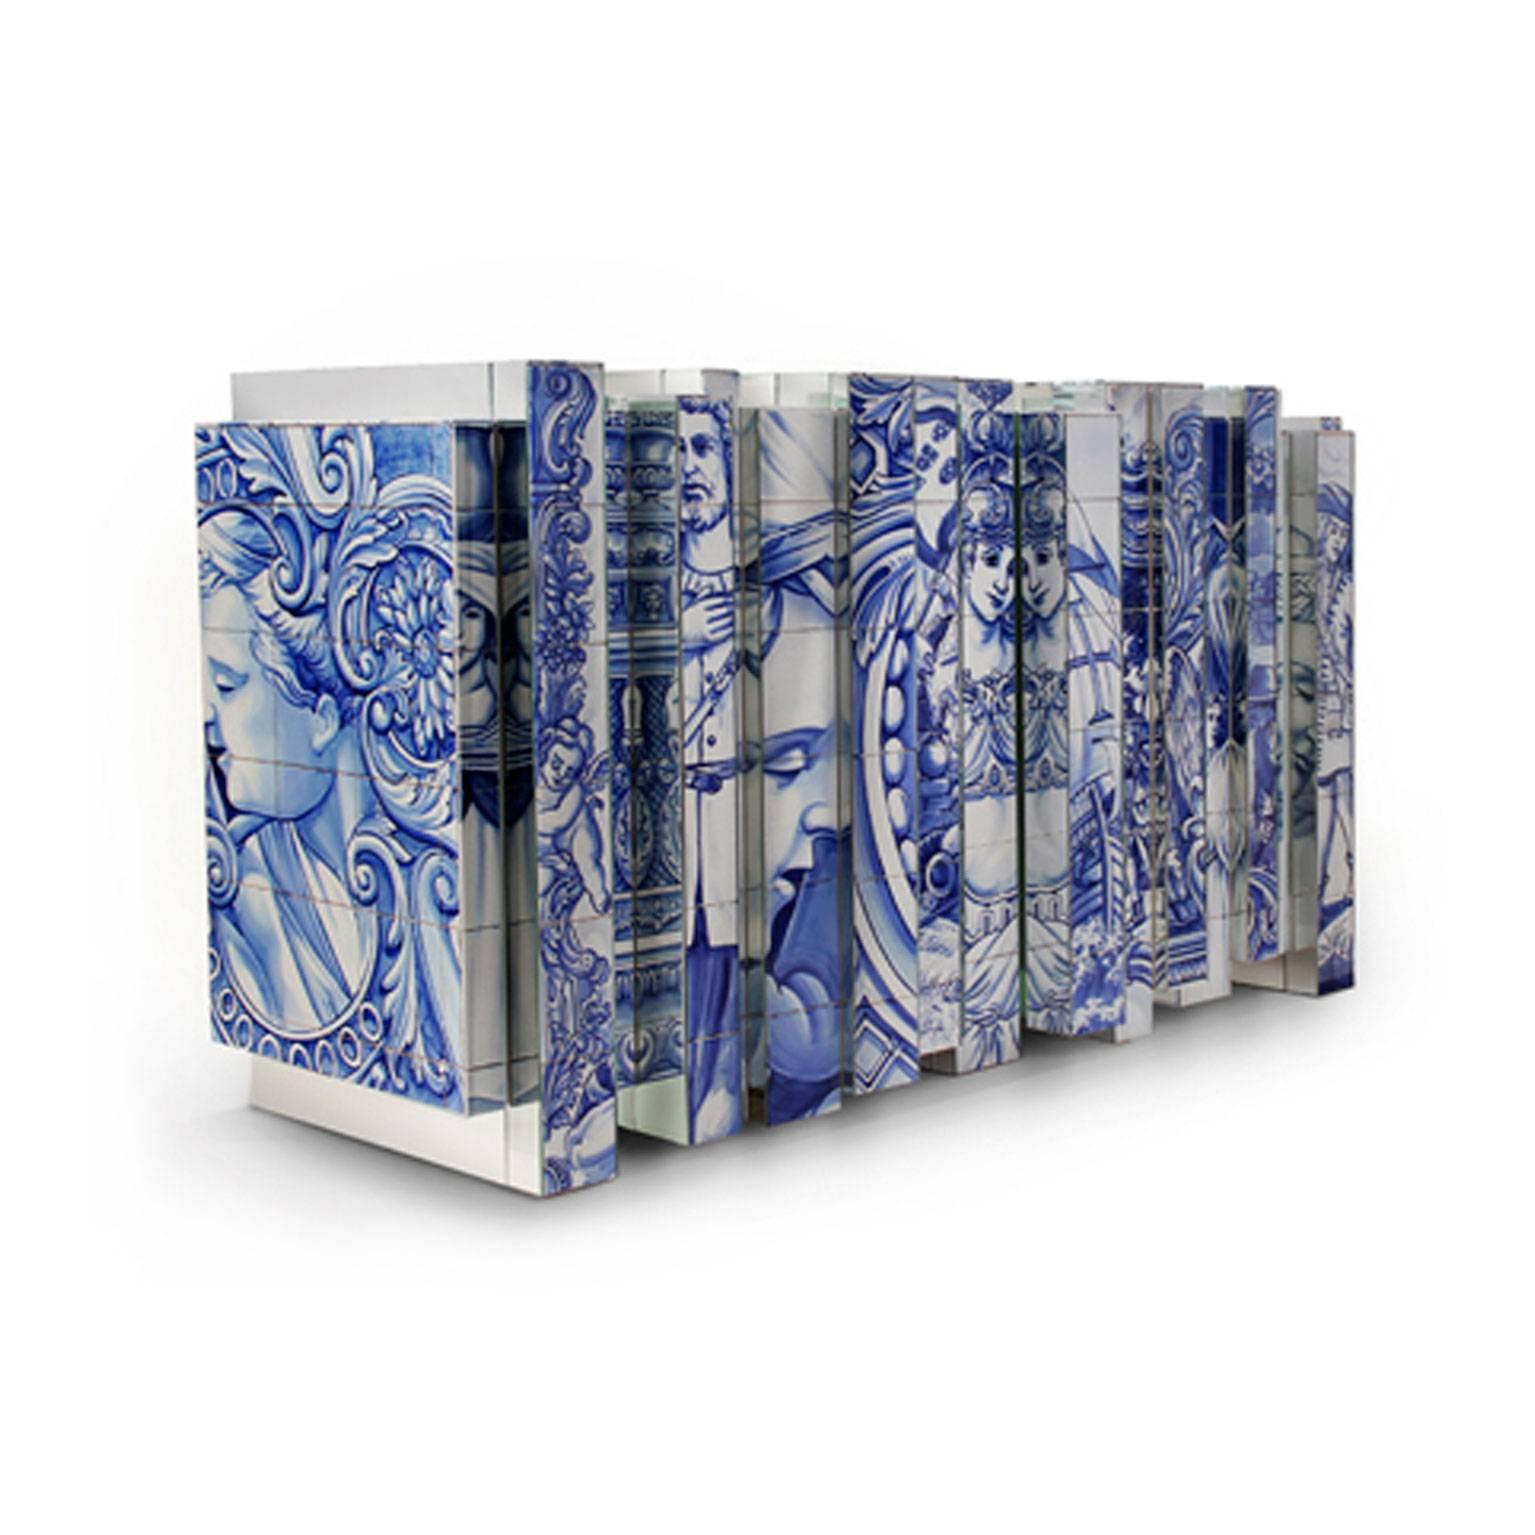 Heritage sideboard by Boca do Lobo. Covered with hand painted blue tiles. Interior composed by one door and four drawers covered with gold leafs. It also has two shelves in bronze and glass. Limited edition product.